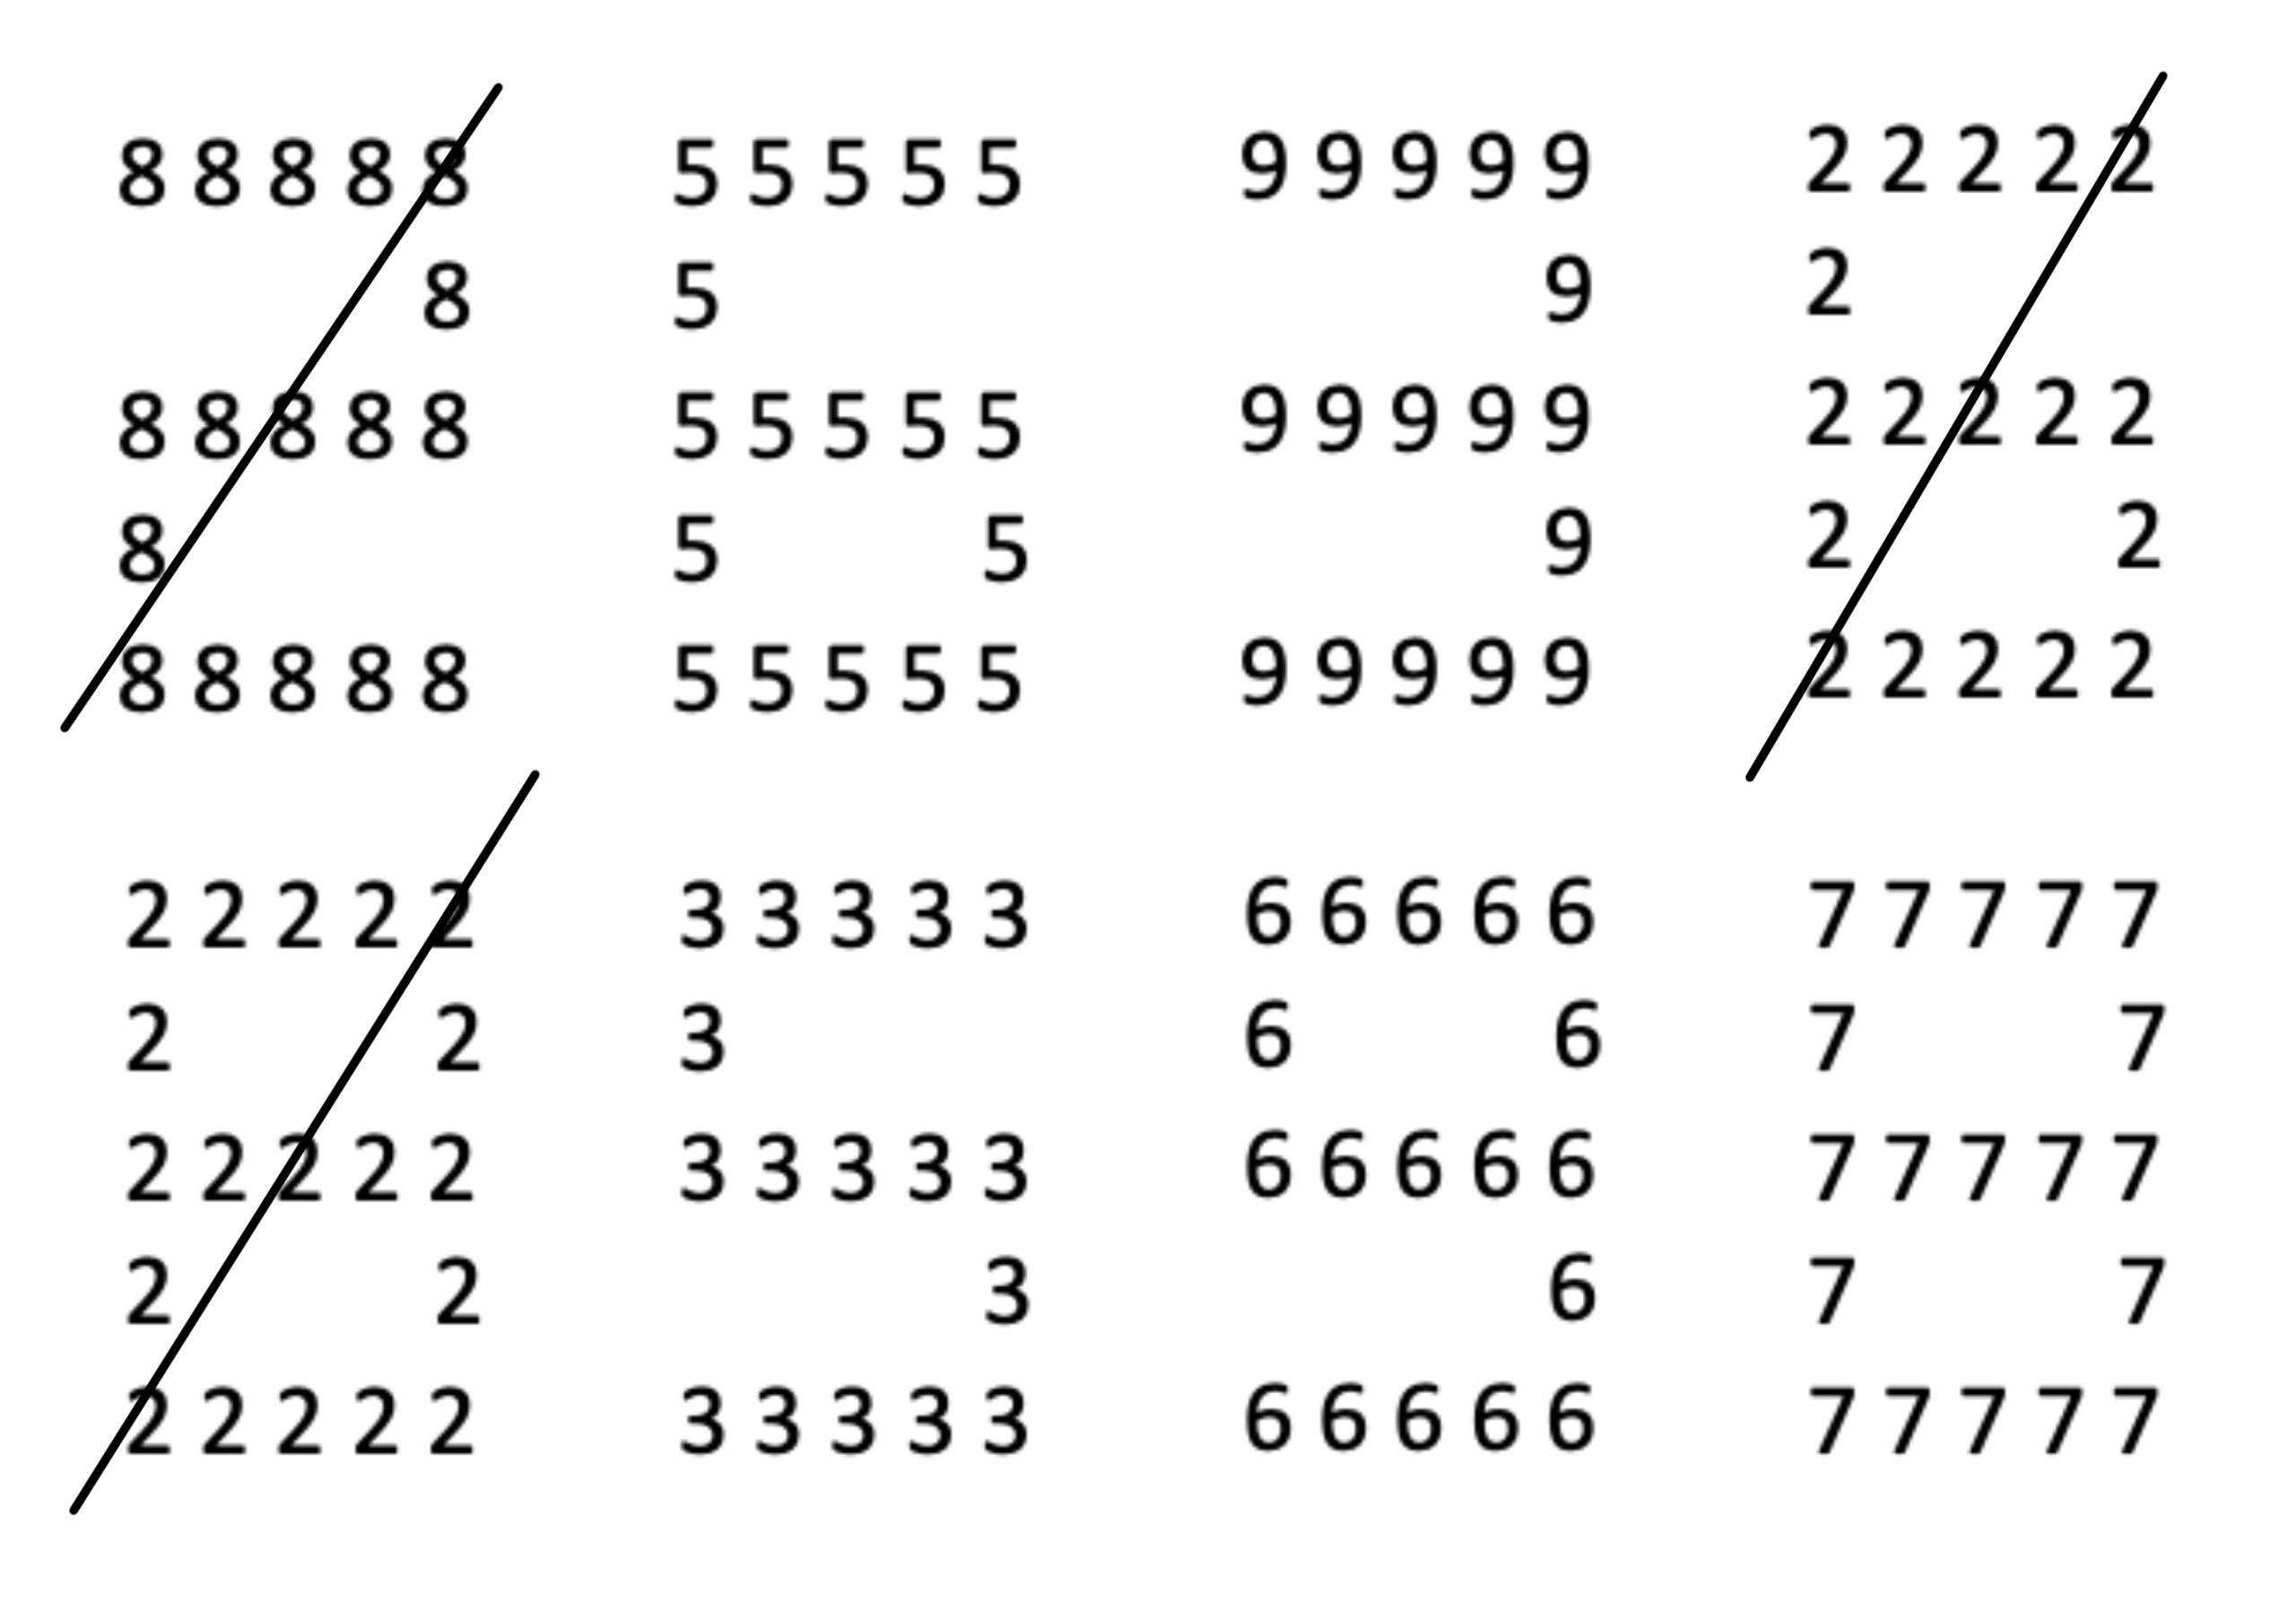 Two rows of four numbers. In all cases, the numbers themselves are made up of smaller numbers. On the top row the numbers presented are 2 (created out of 8's), 6 (created out of 5's), 3 (created out of 9's), and 6 (created out of 2's). The first and last numbers are crossed out.